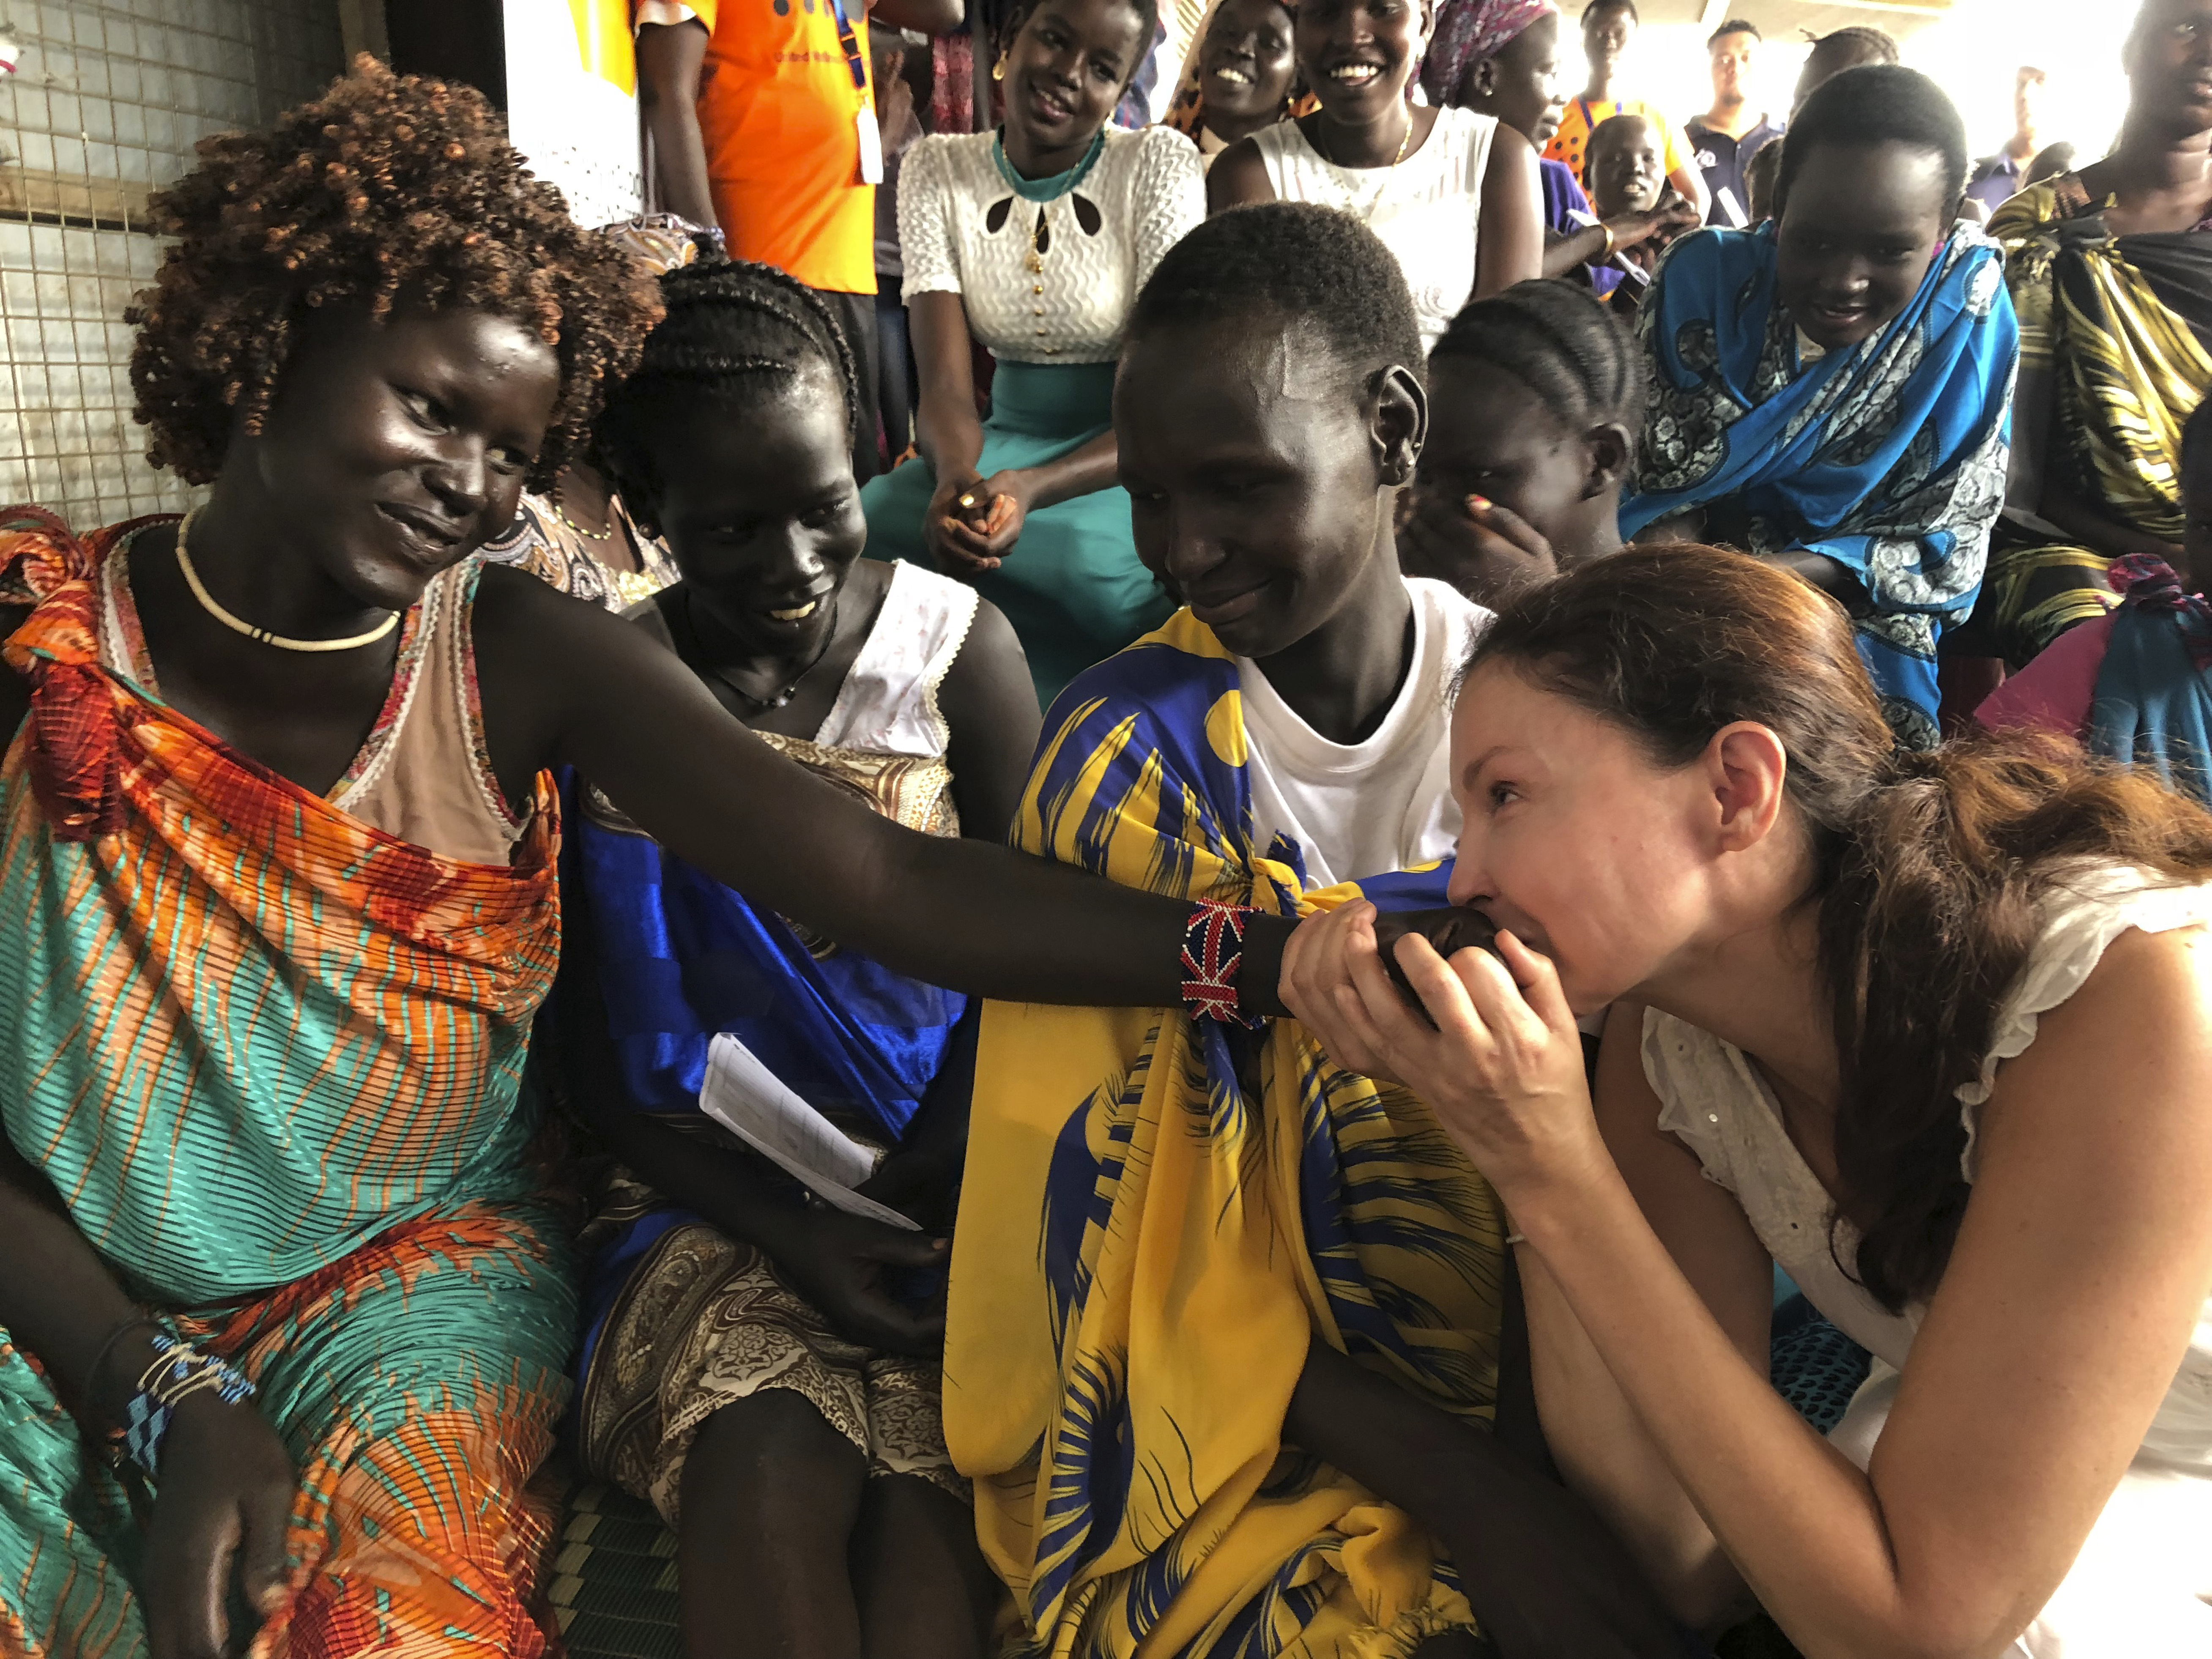 Actress Ashley Judd meets refugees in Juba, South Sudan